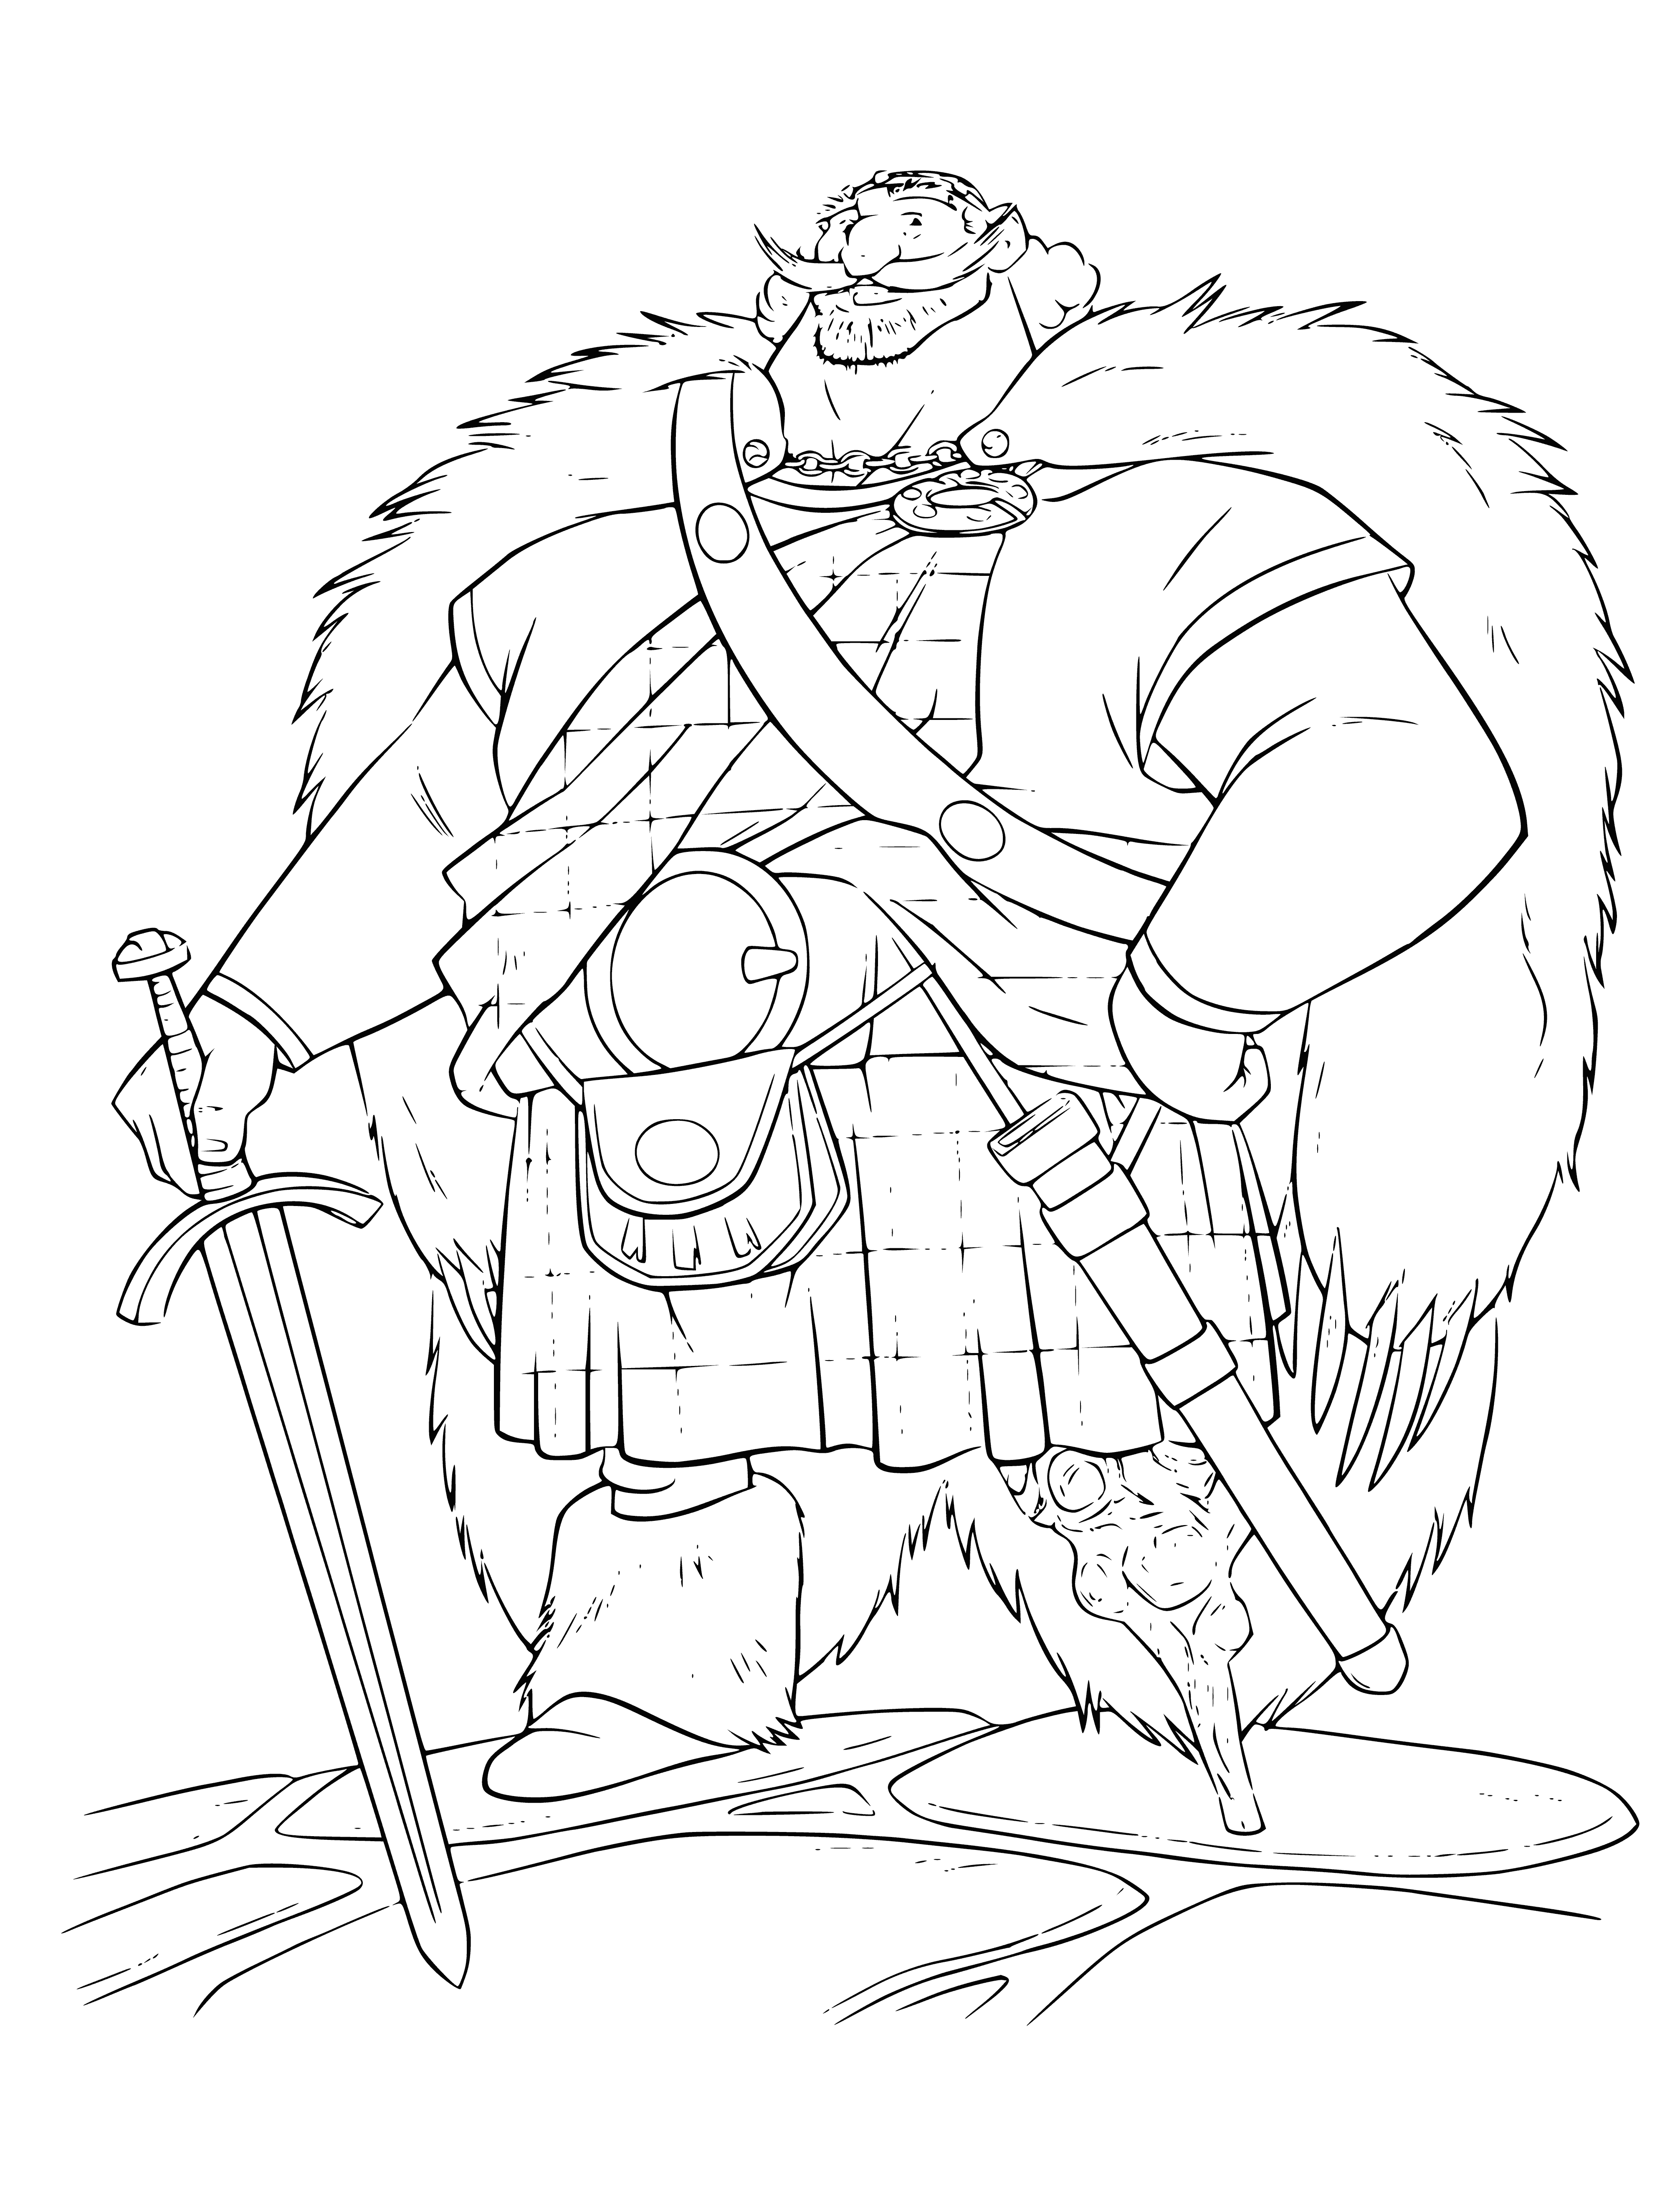 coloring page: Powerful leader with red cape, crown, and weapons leads brave soldiers into battle. Courageous pride fills the air. #hero #legend #army